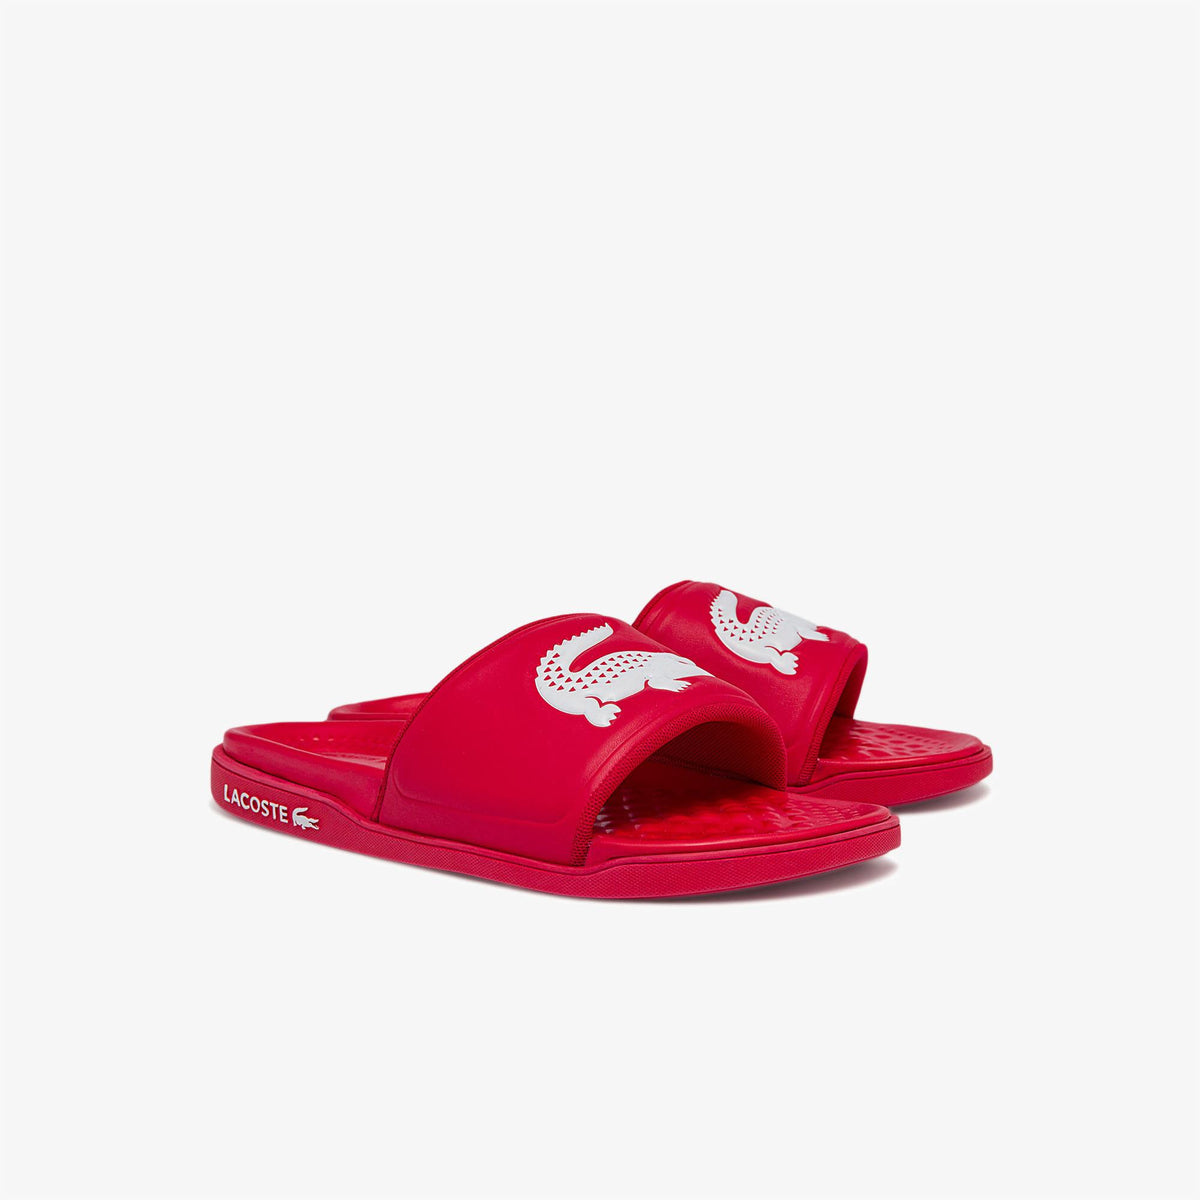 Men's Croco Dualiste Synthetic Slides - Red/White